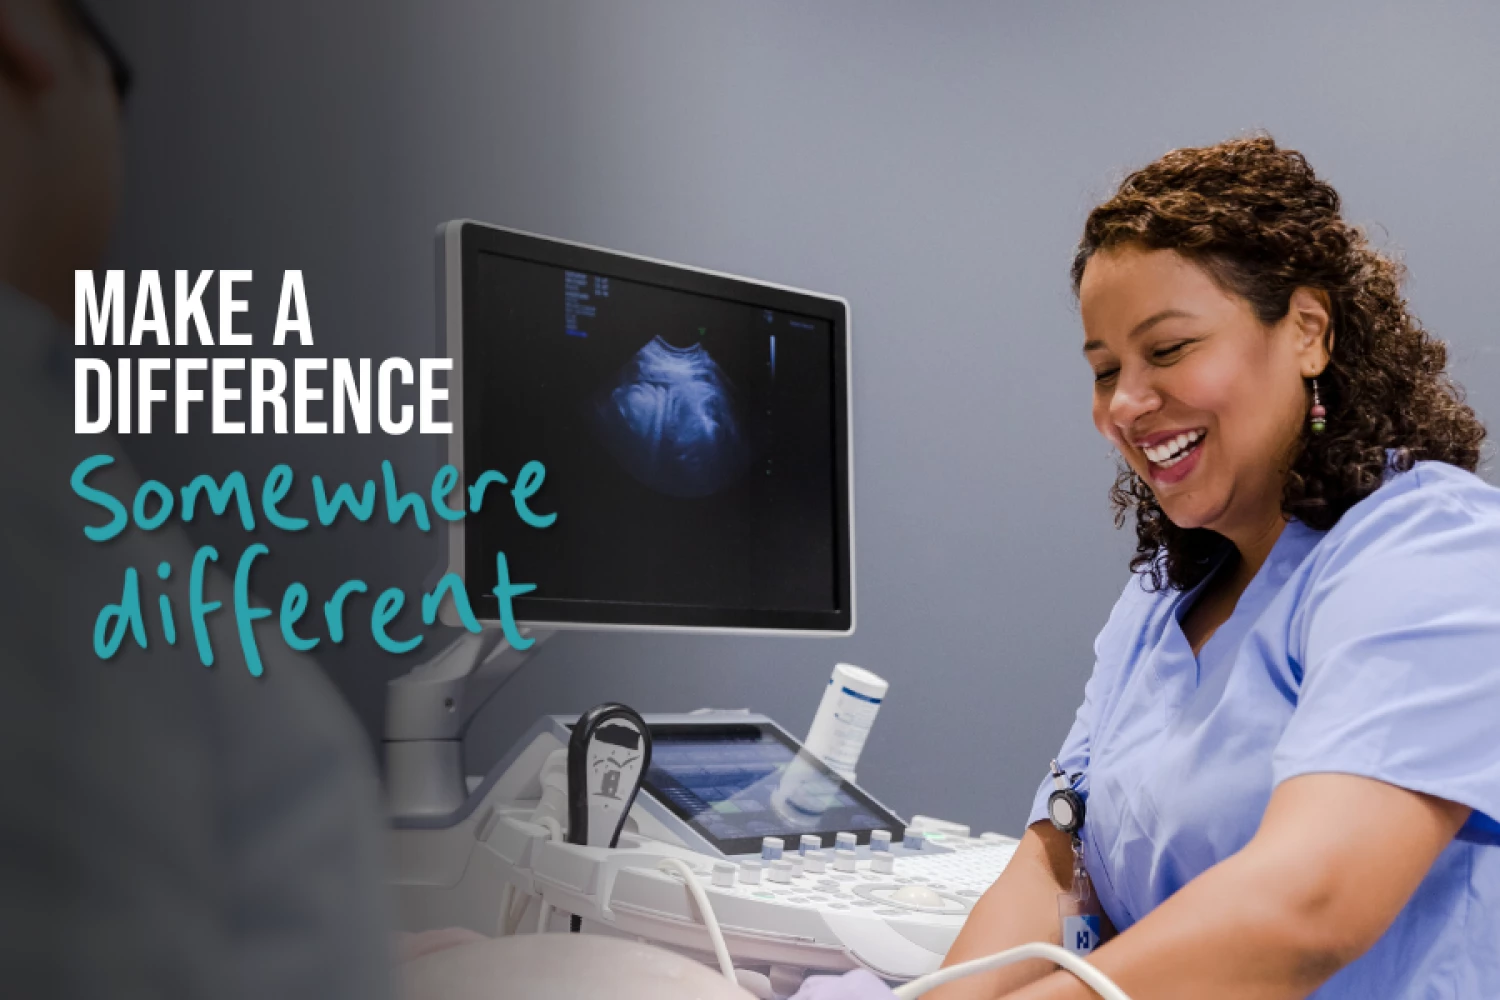 Sonographer making a difference somewhere different